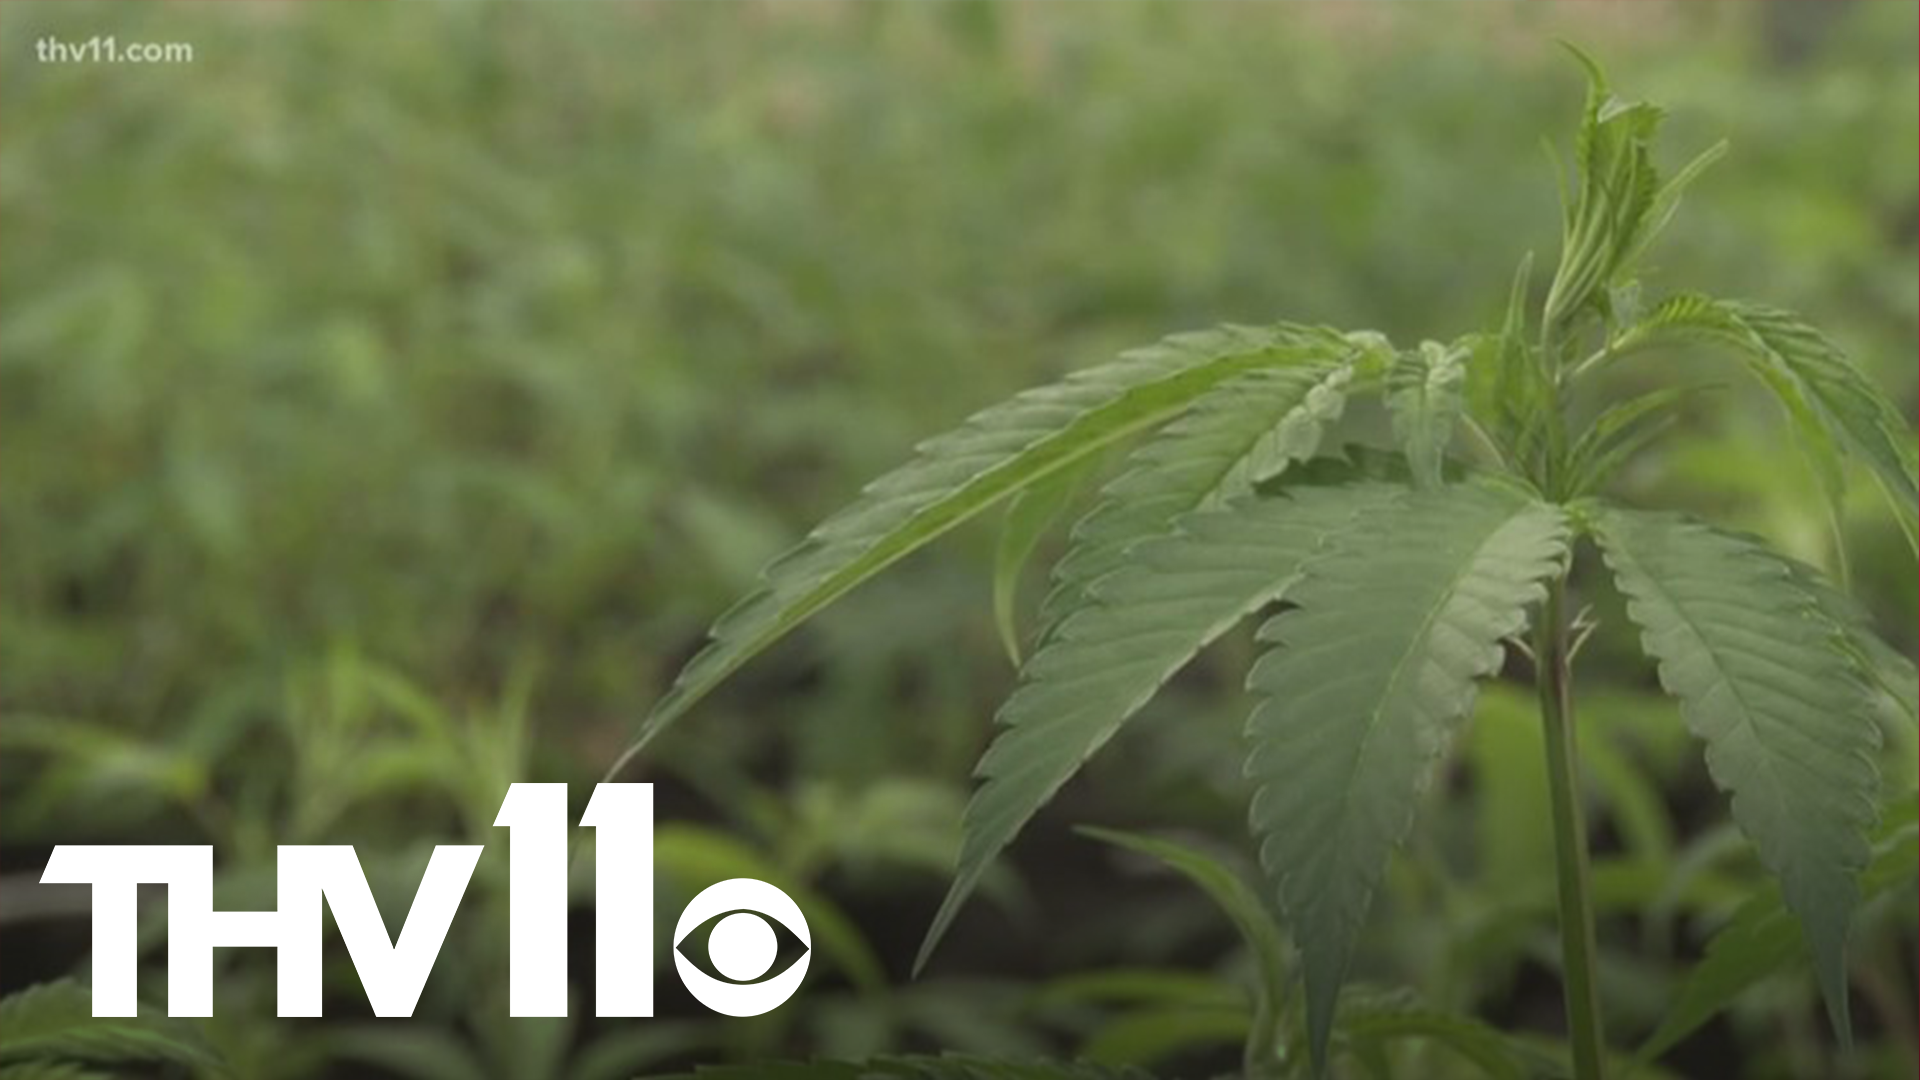 Hundreds of new jobs are coming to Pine Bluff as a new facility is set to open in a few months. This facility will be responsible for growing marijuana.